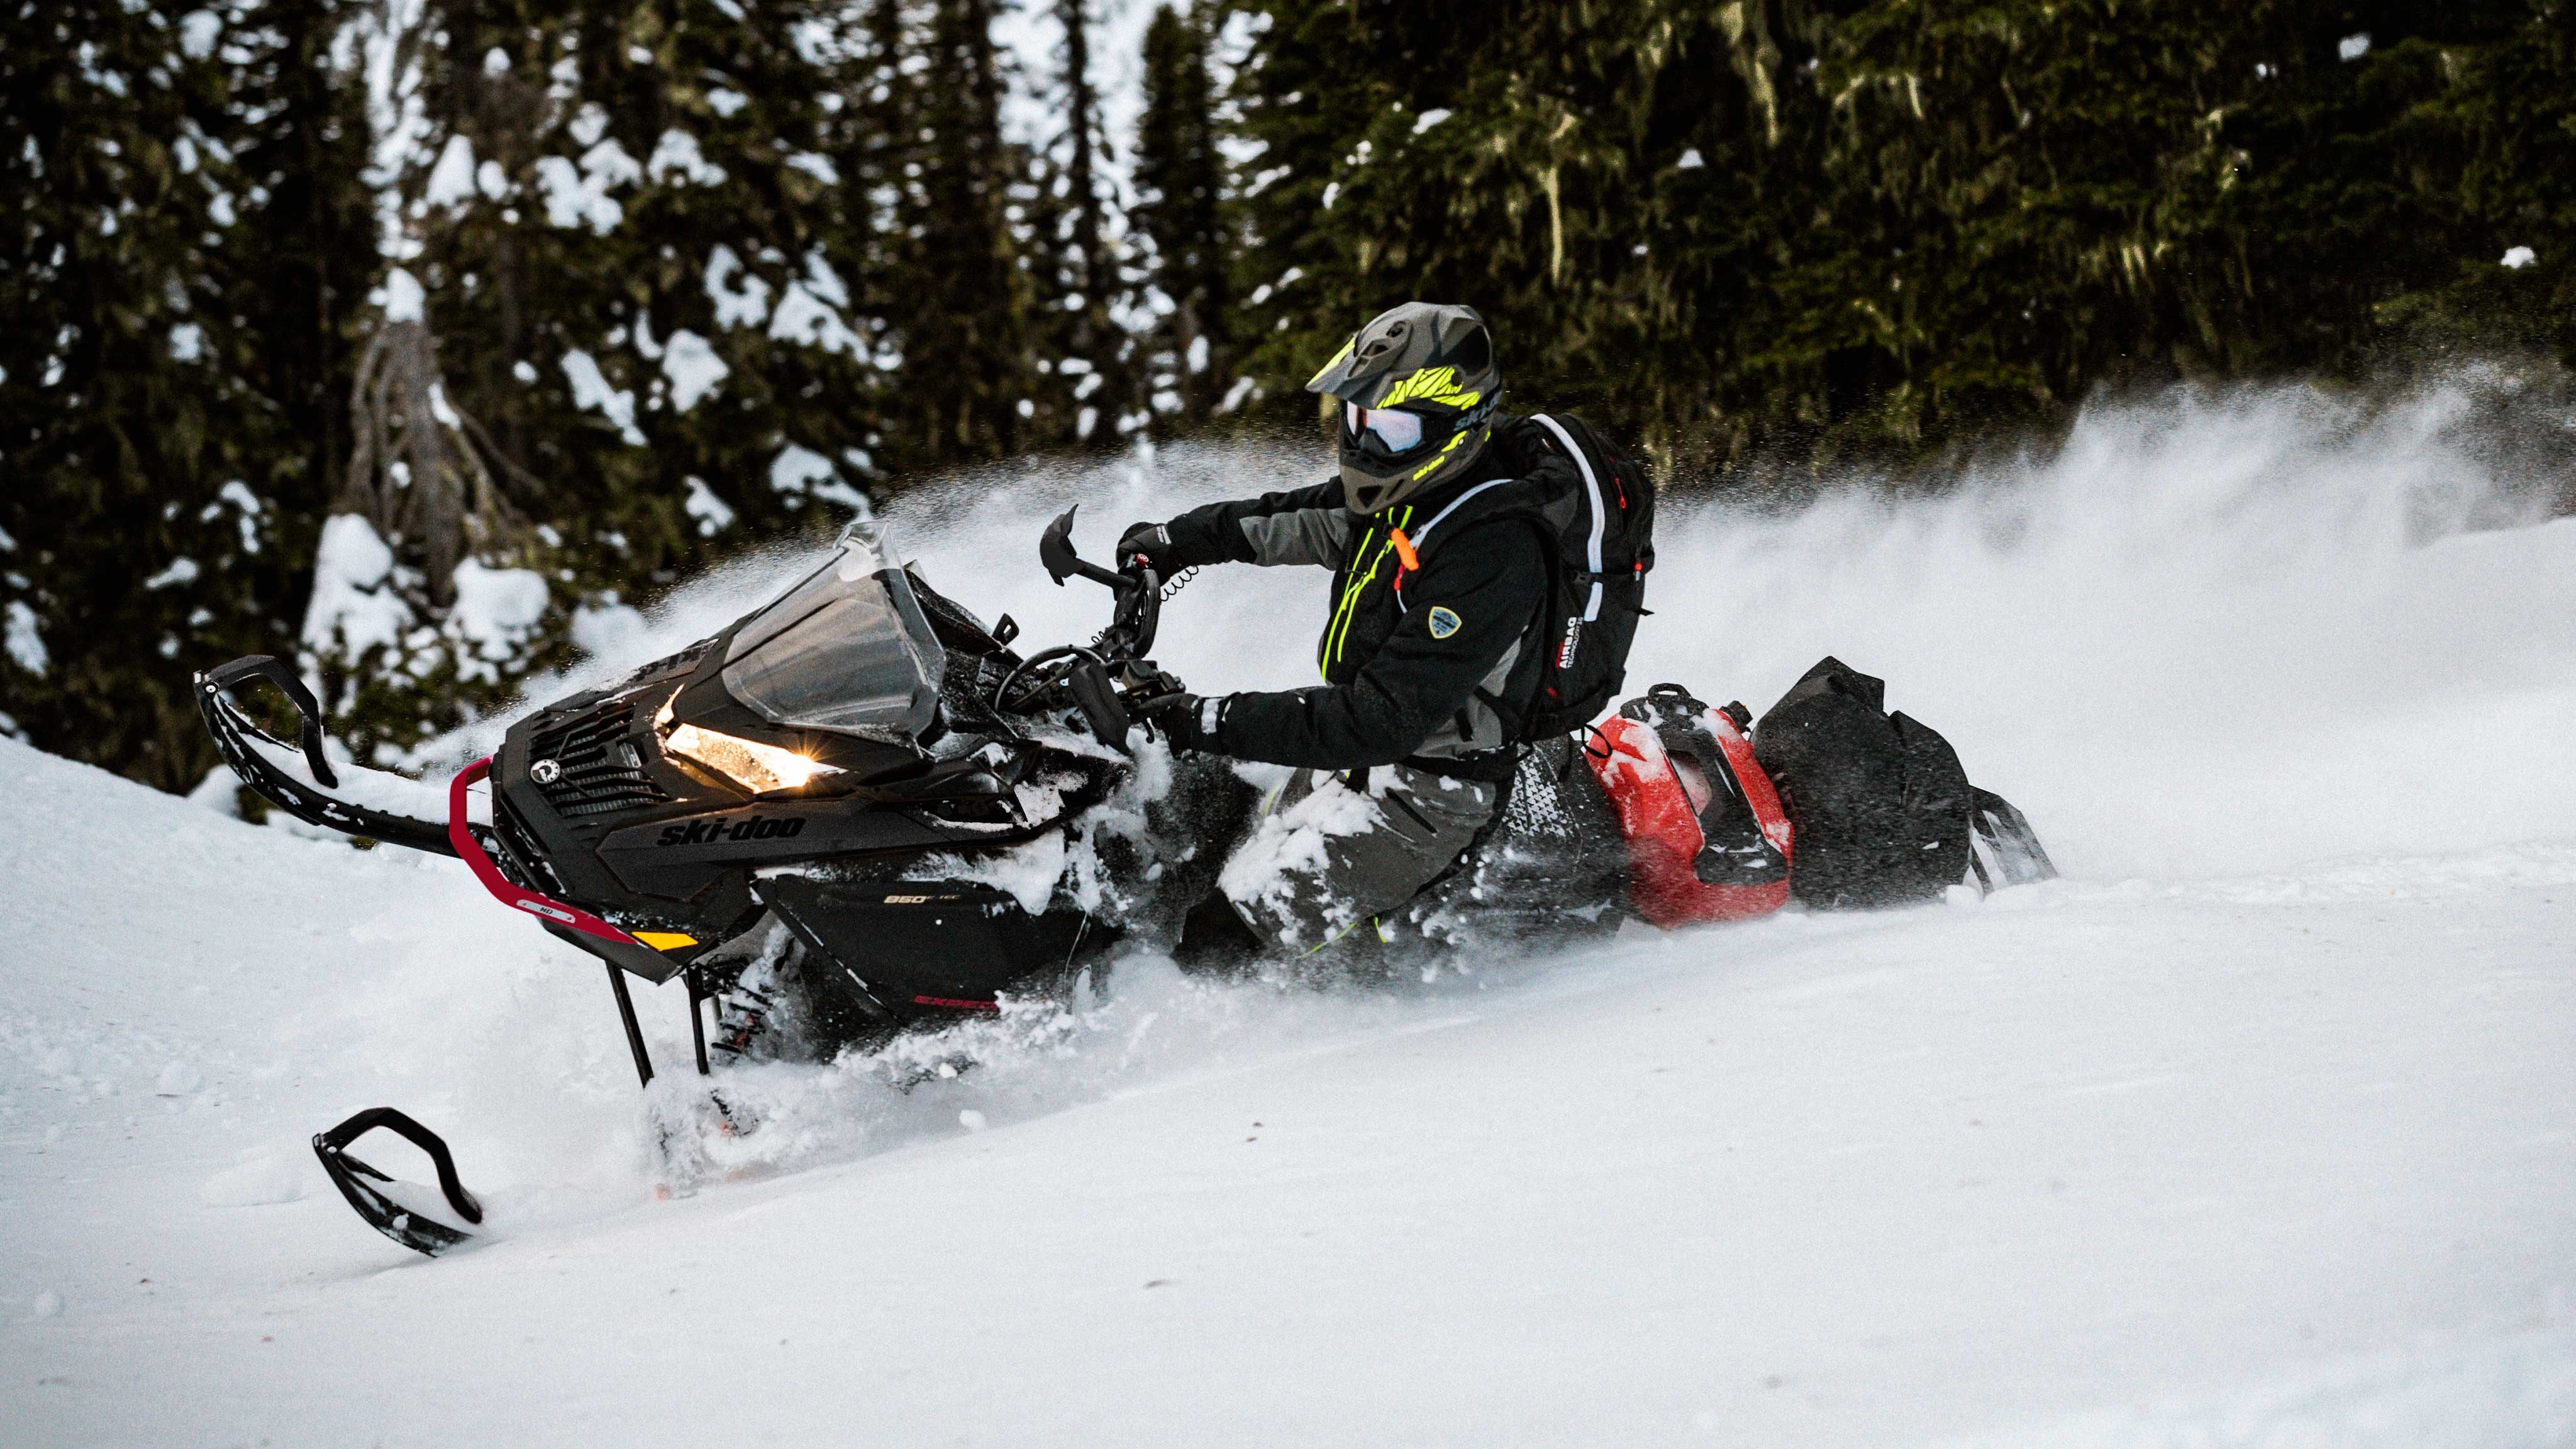 2022 Ski-Doo Expedition carving in deep-snow